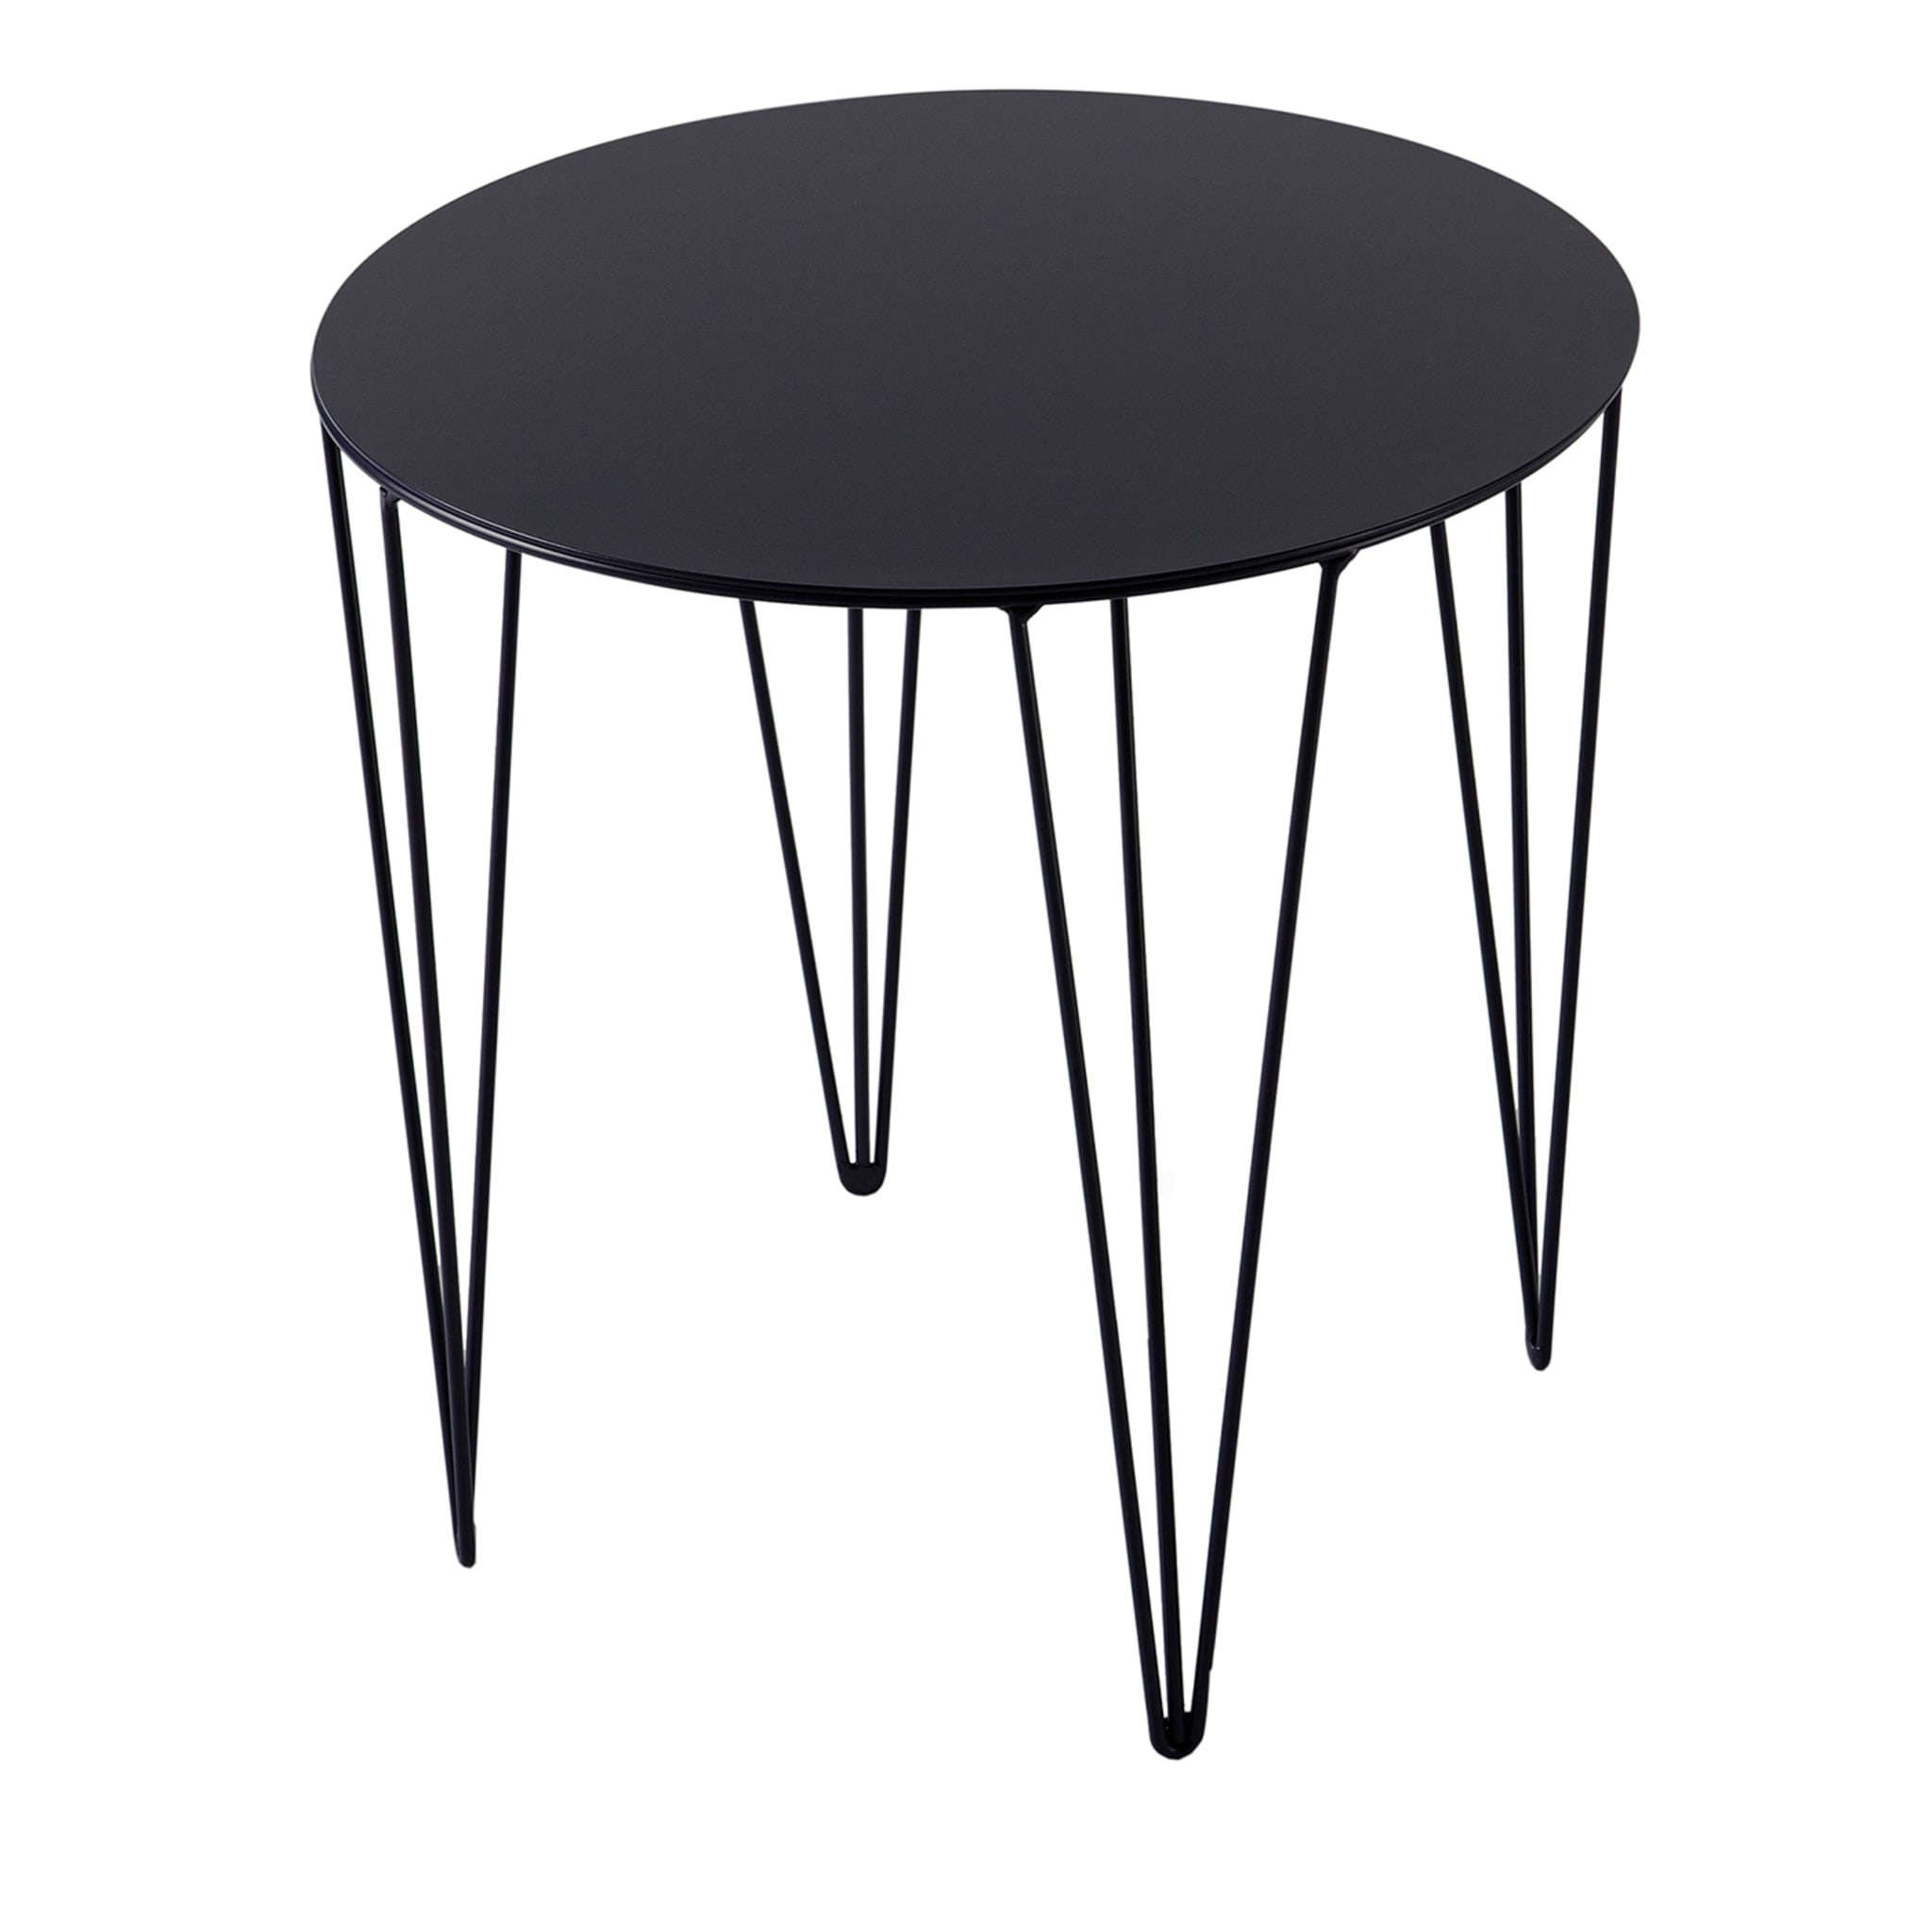 Chele Black Round Coffee Table #1 - Main view